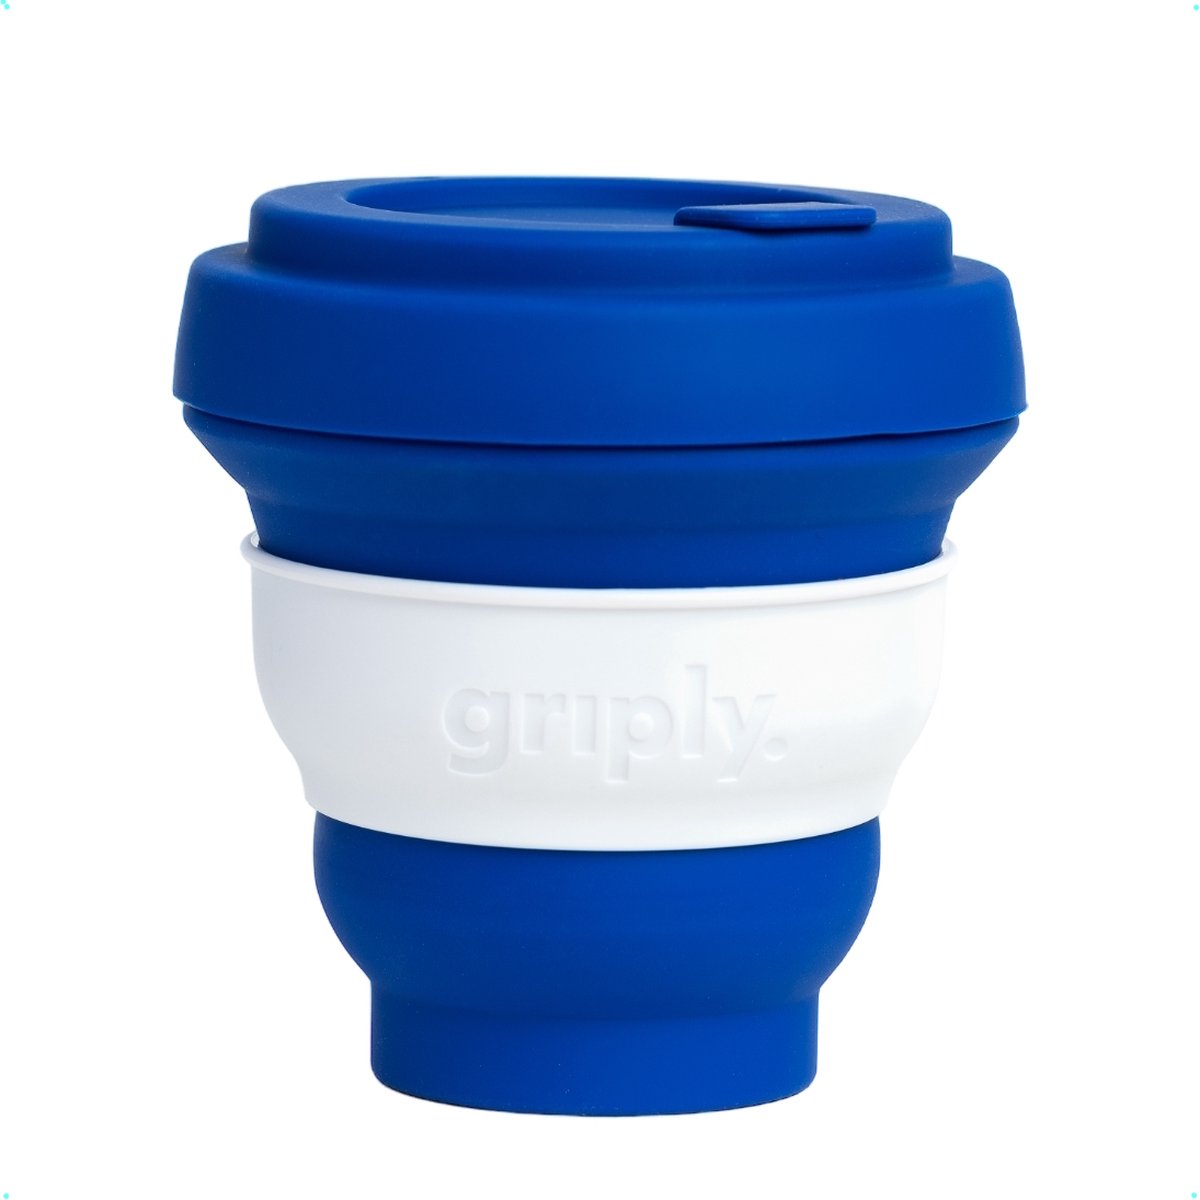 Griply to go - Opvouwbare koffiebeker met ring - 100% food grade siliconen - Surf the web - 355ml